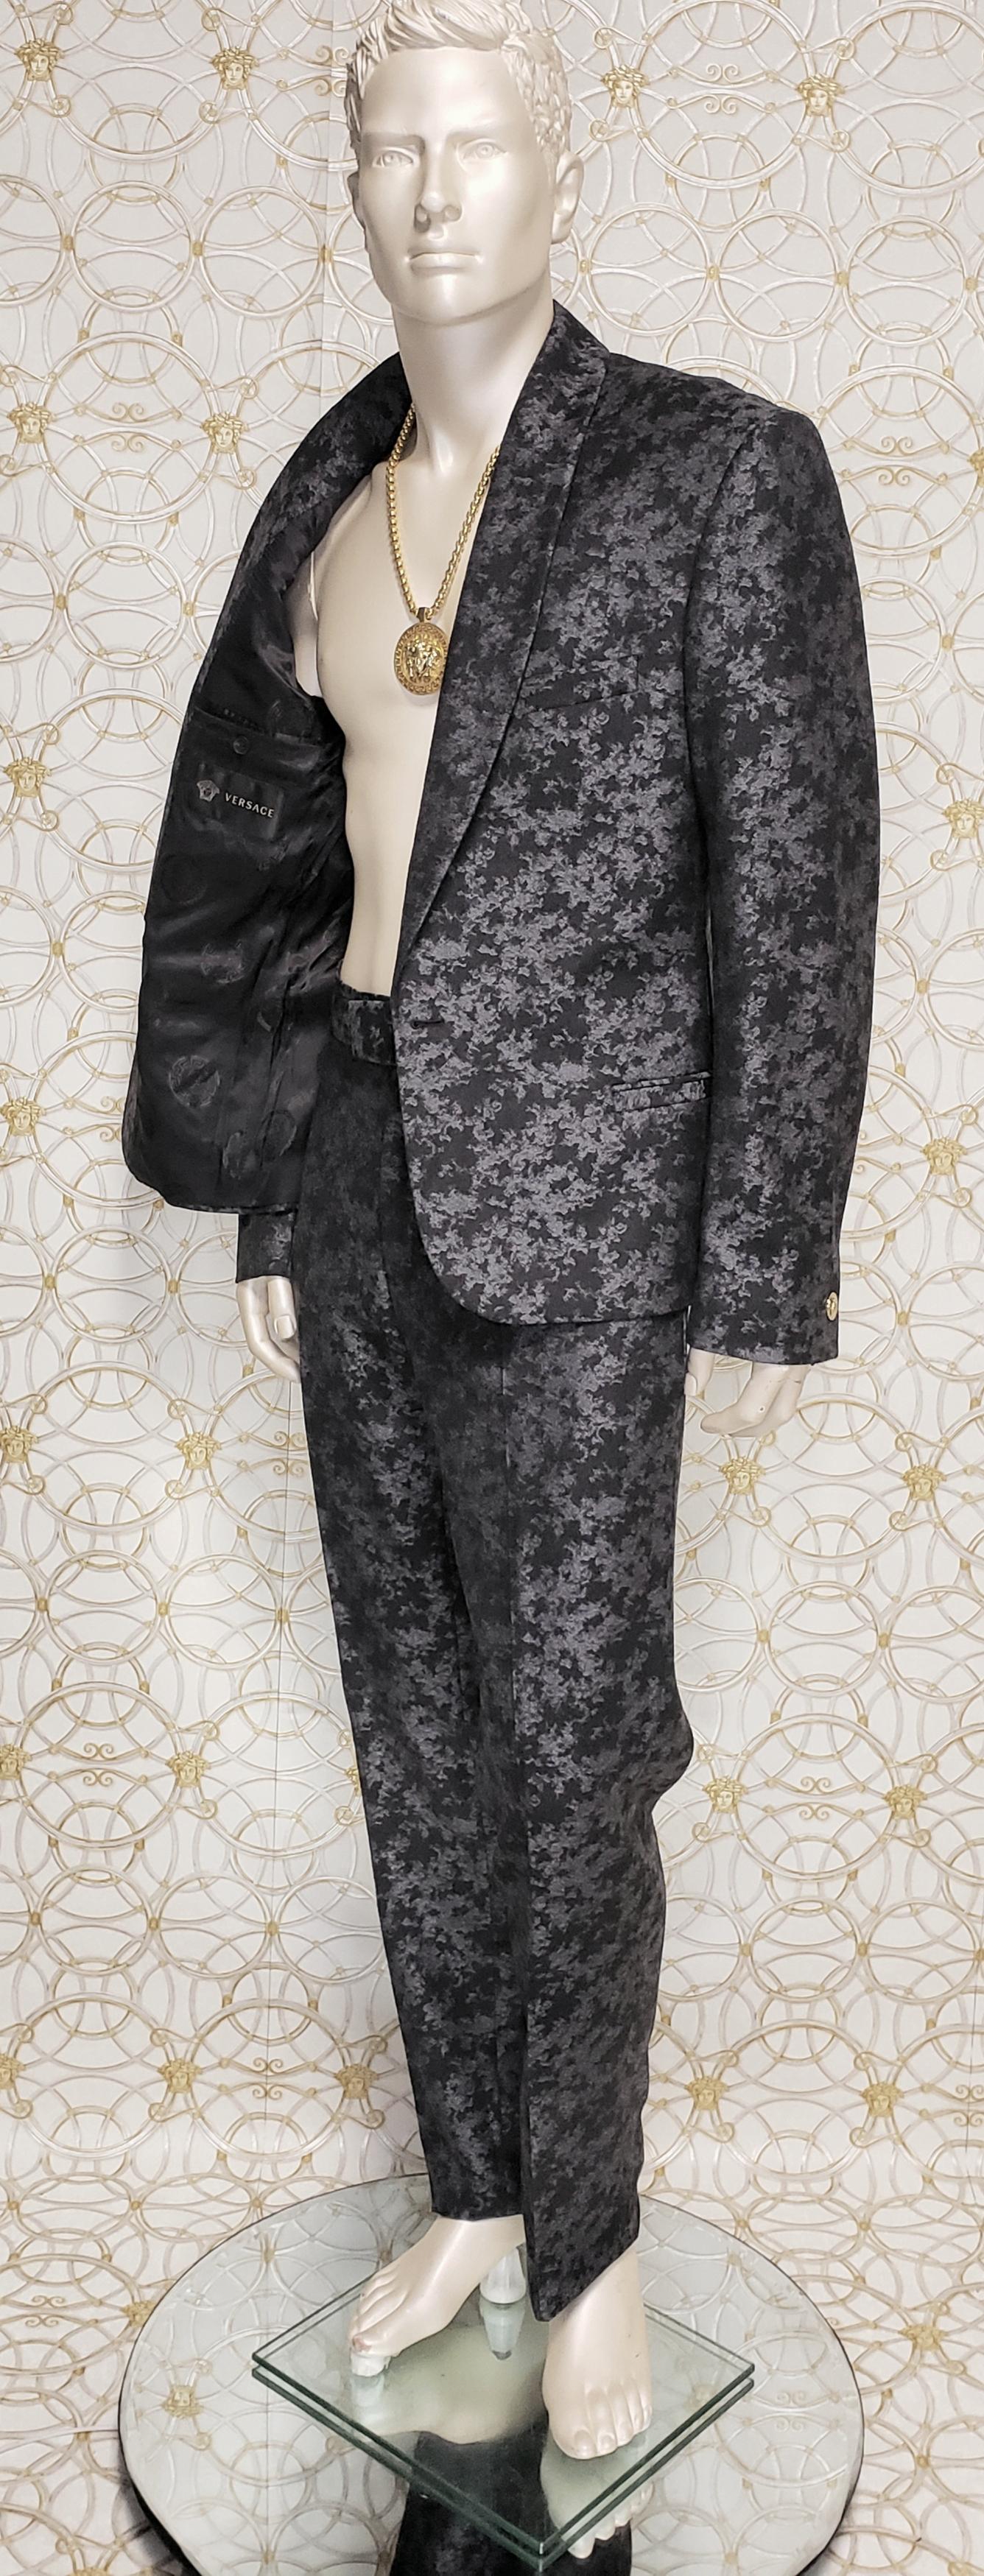 FALL/WINTER 2012 look # 16, 22 BRAND NEW VERSACE GRAY SUIT 48 - 38 (M) 1